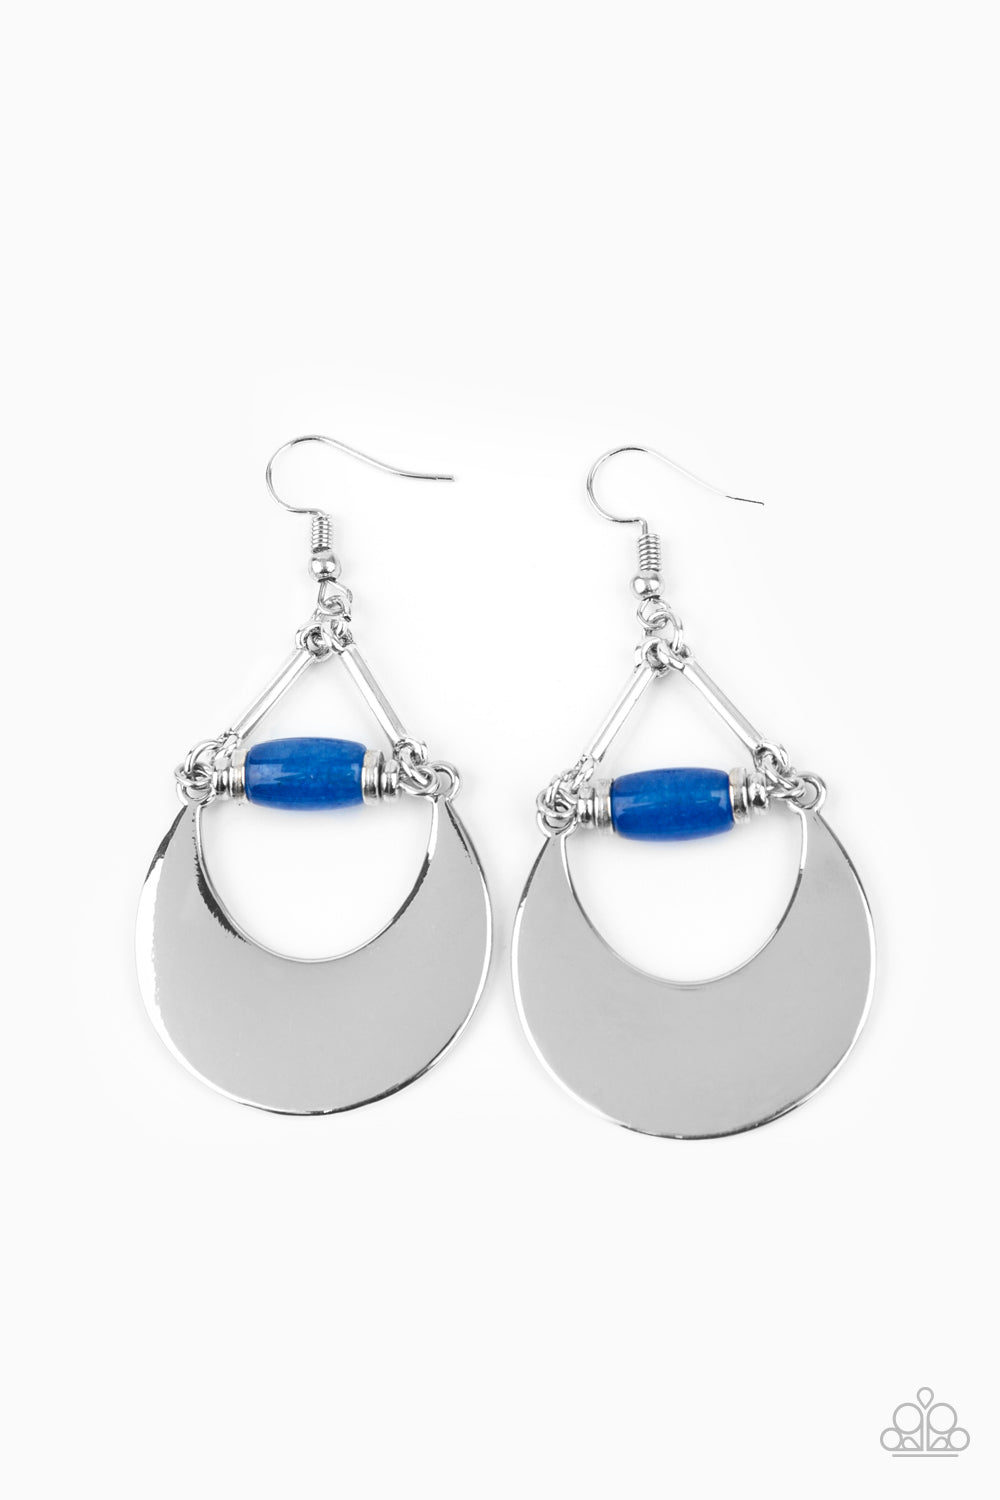 Paparazzi Accessories Mystical Moonbeams - Blue Earrings - Lady T Accessories